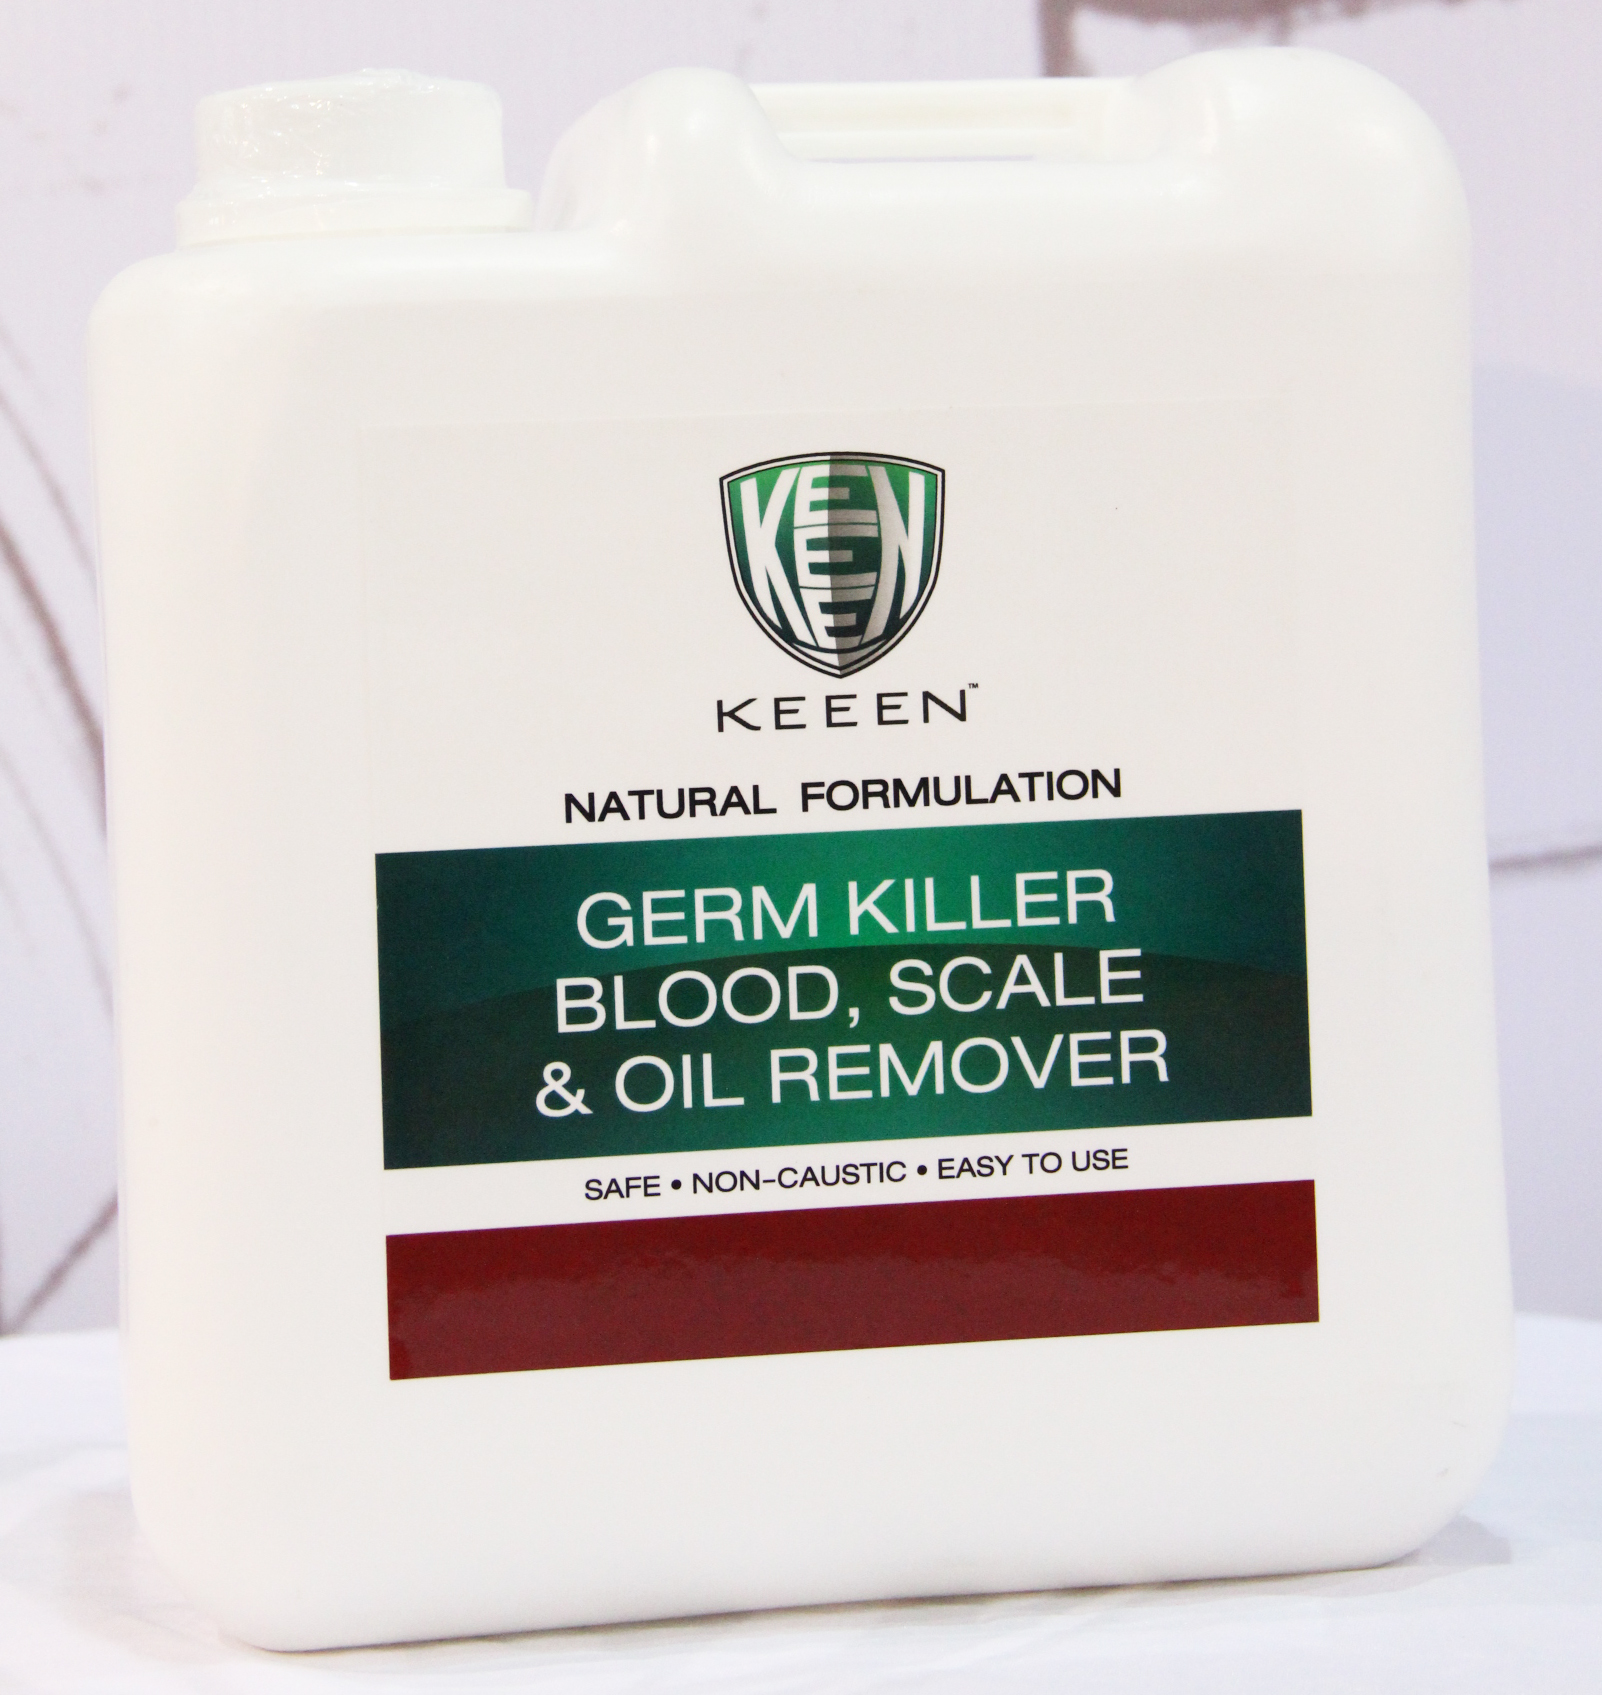 04 - Germ Killer - Blood, Scale & Oil Remover